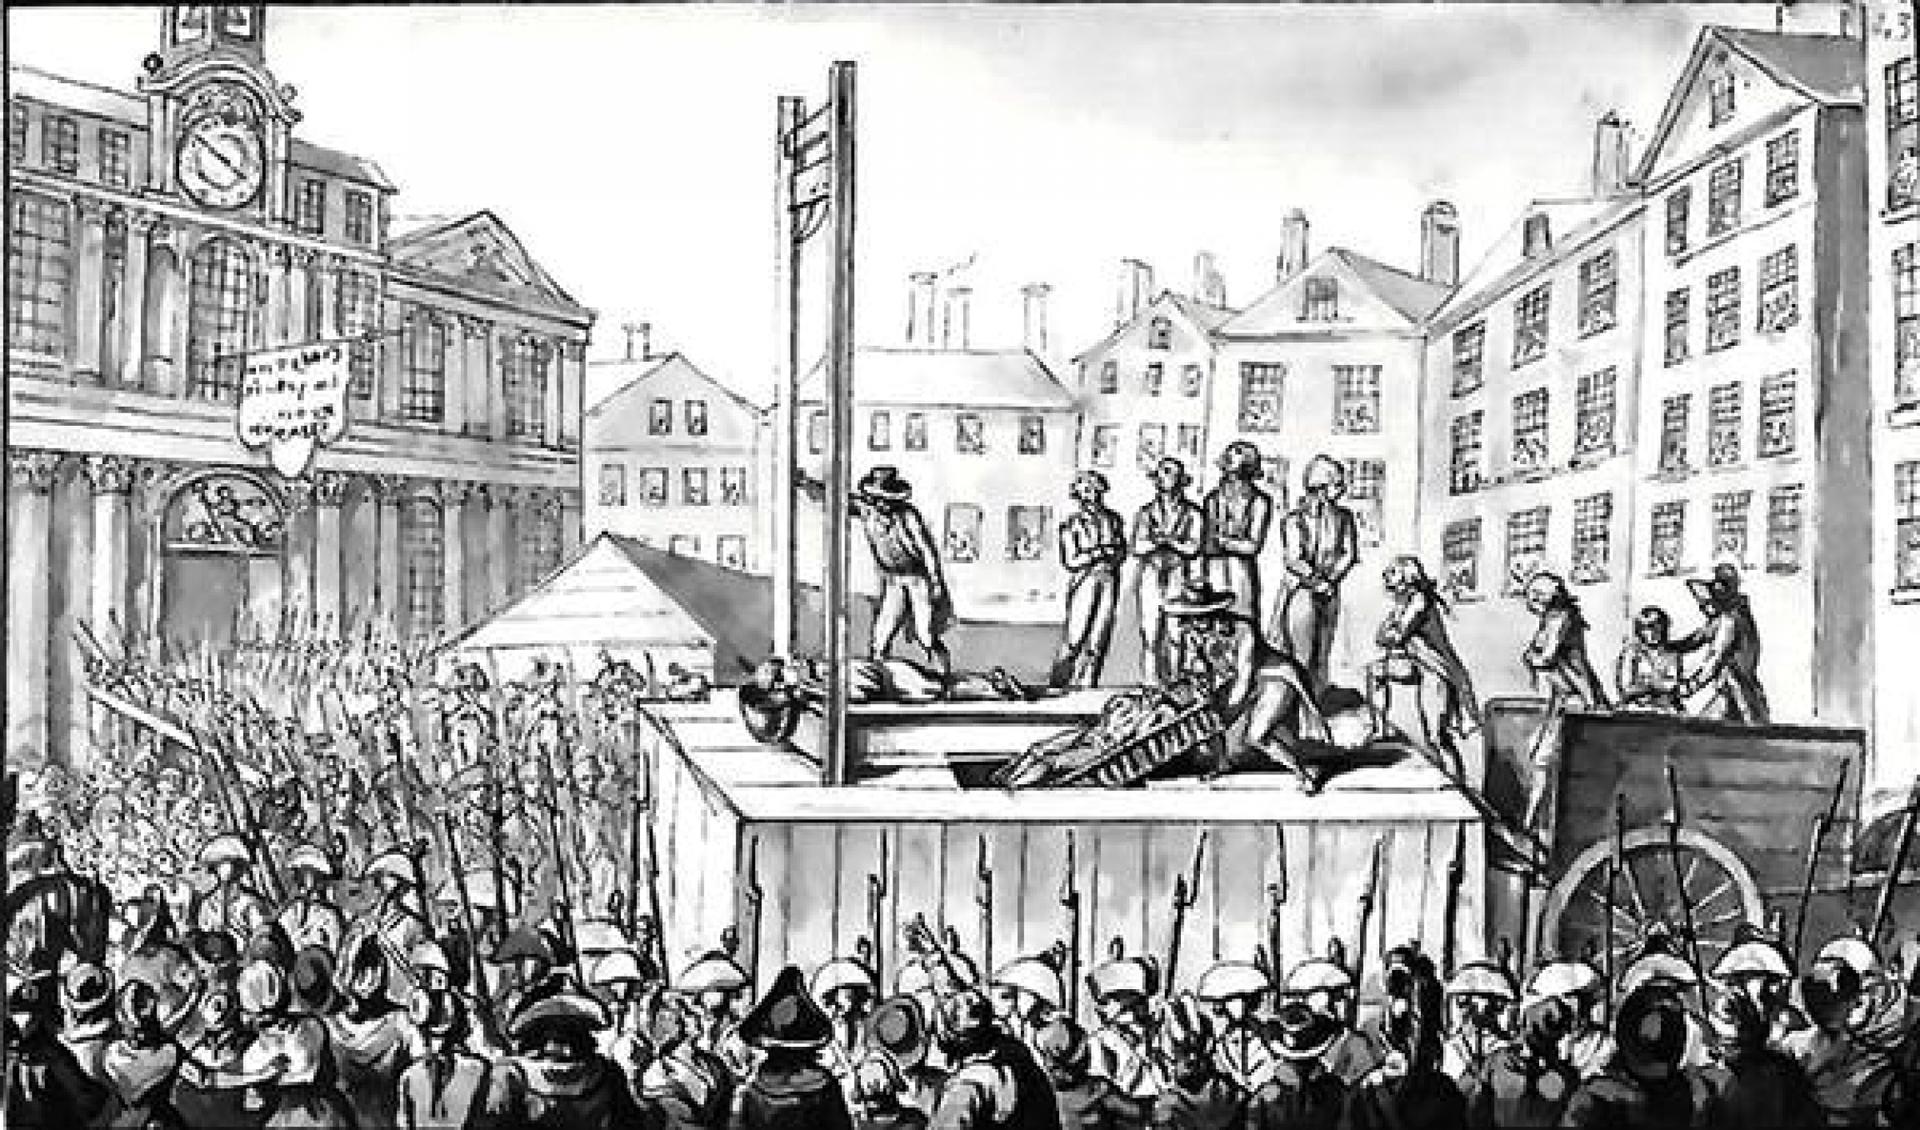 A black and white drawing depicting a guillotine execution in France